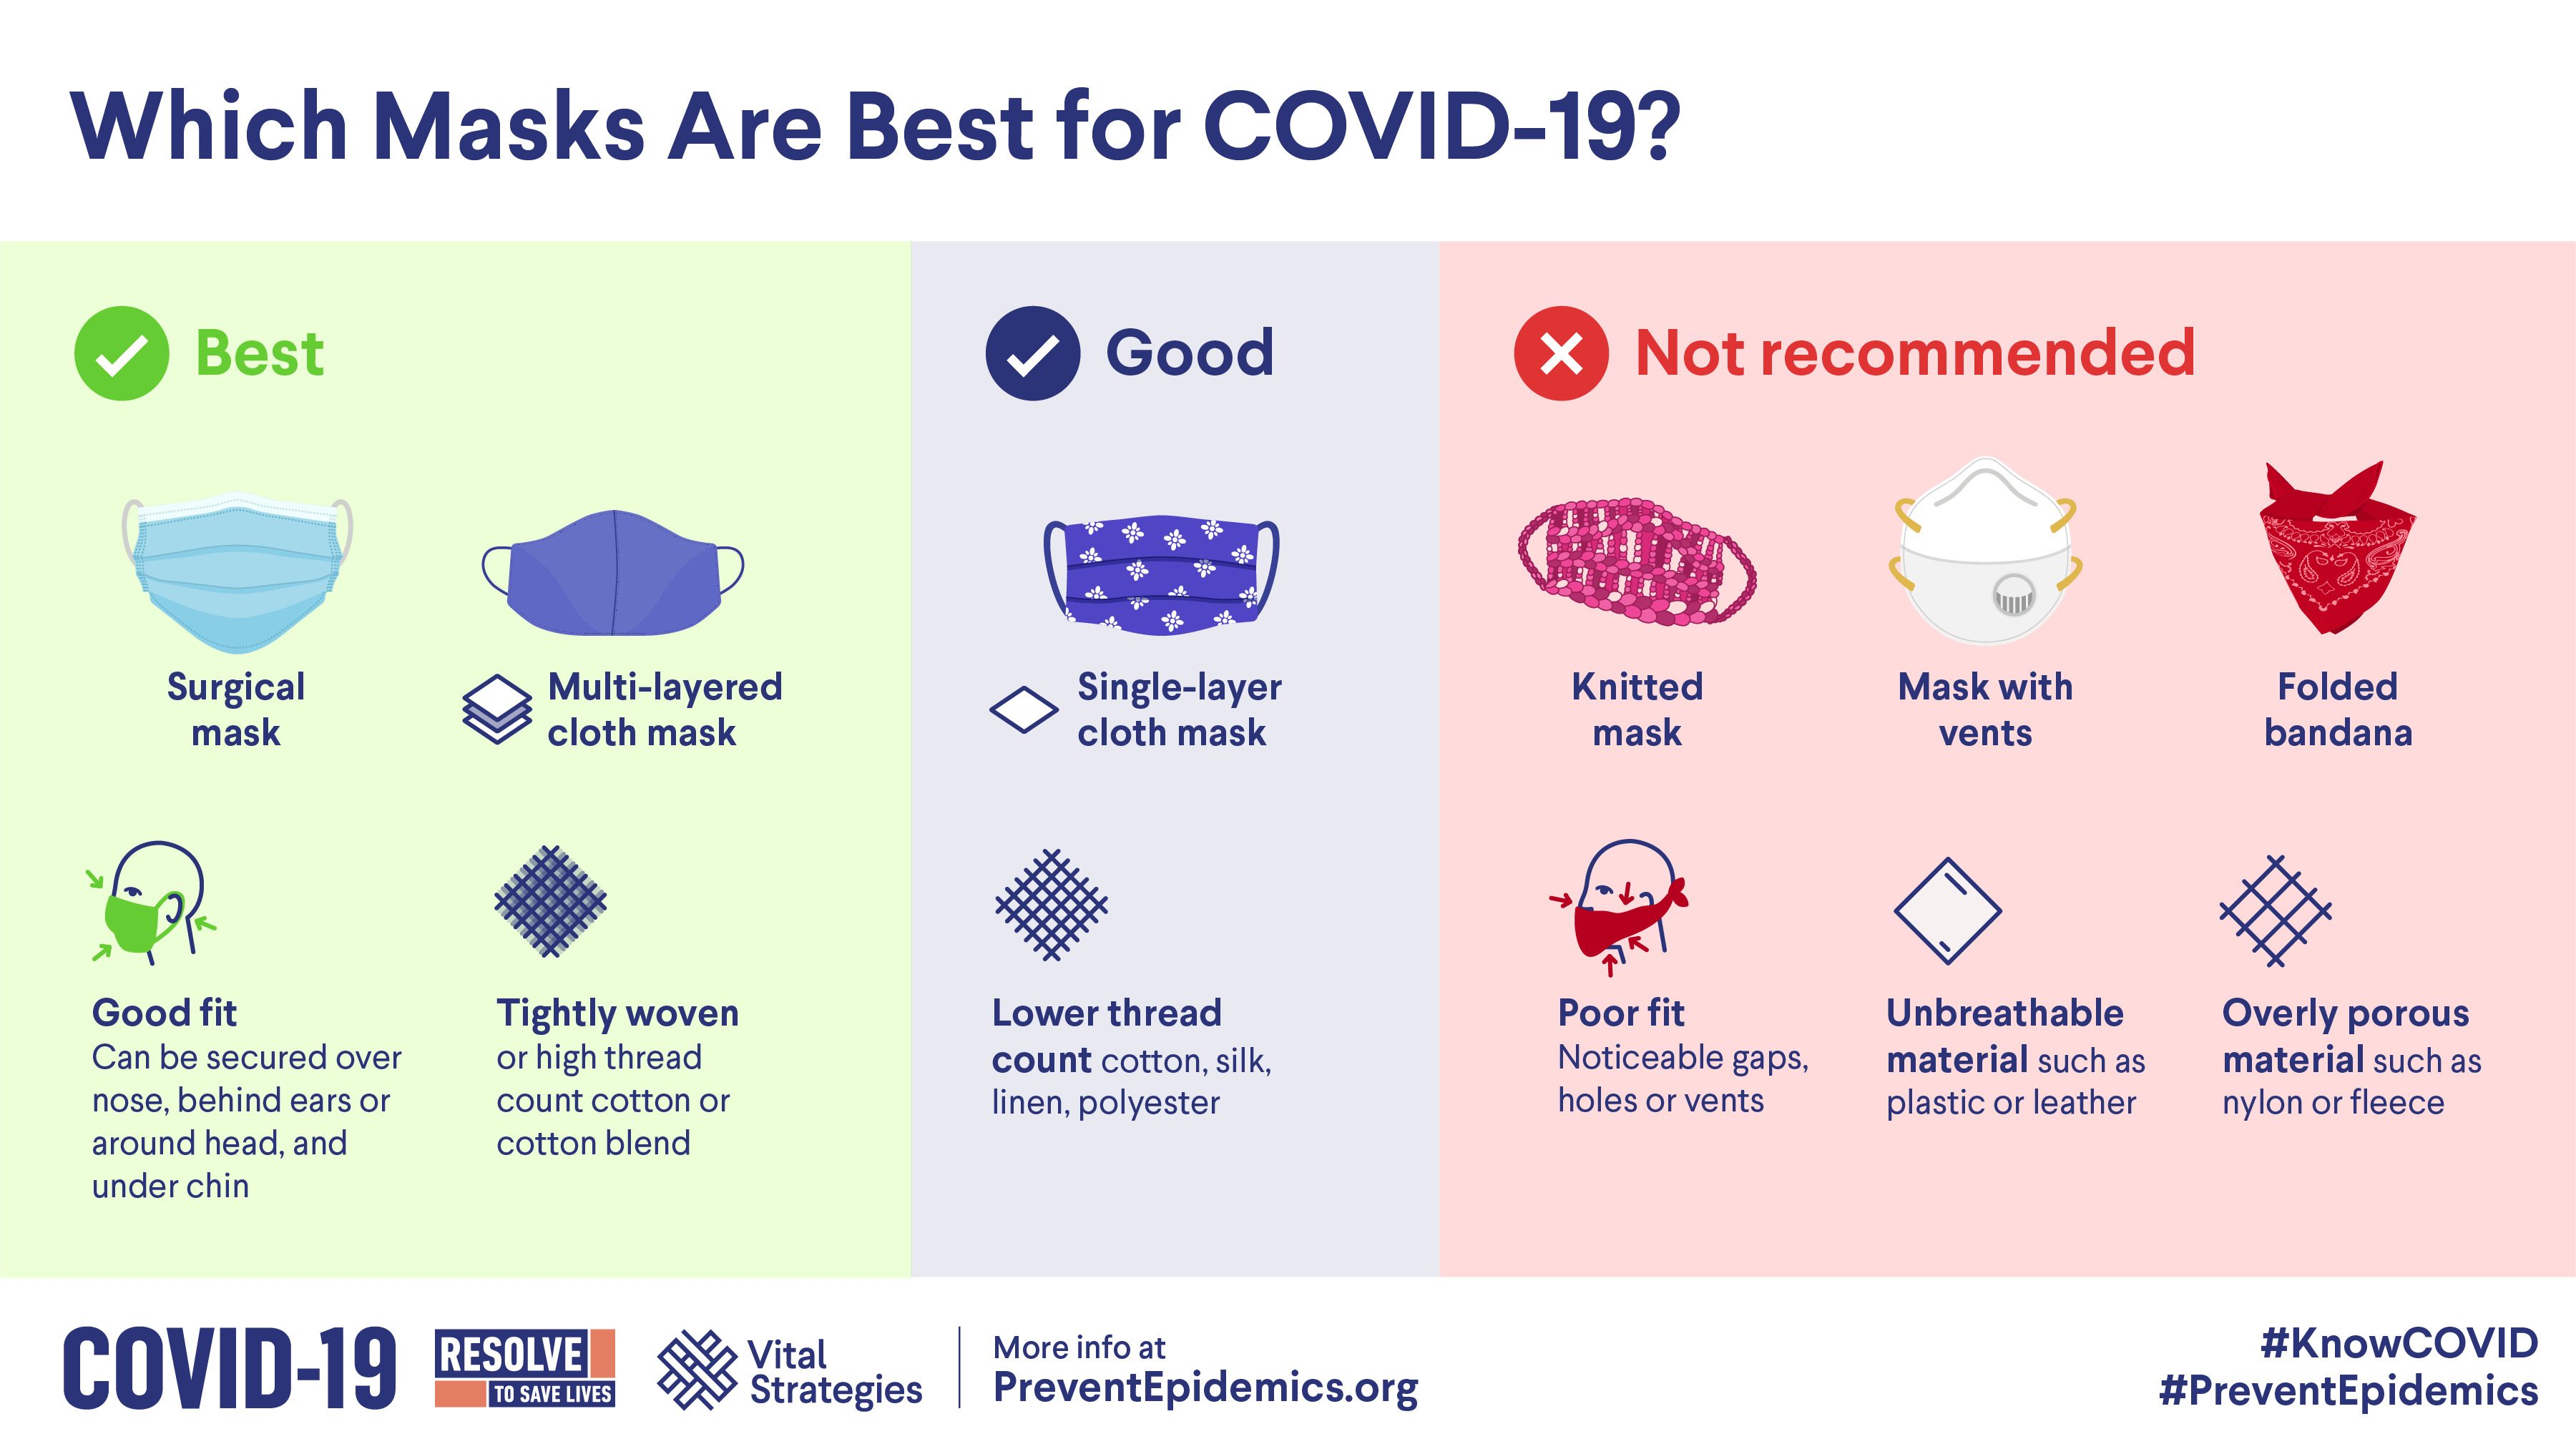 A chart showing which masks are better for COVID.